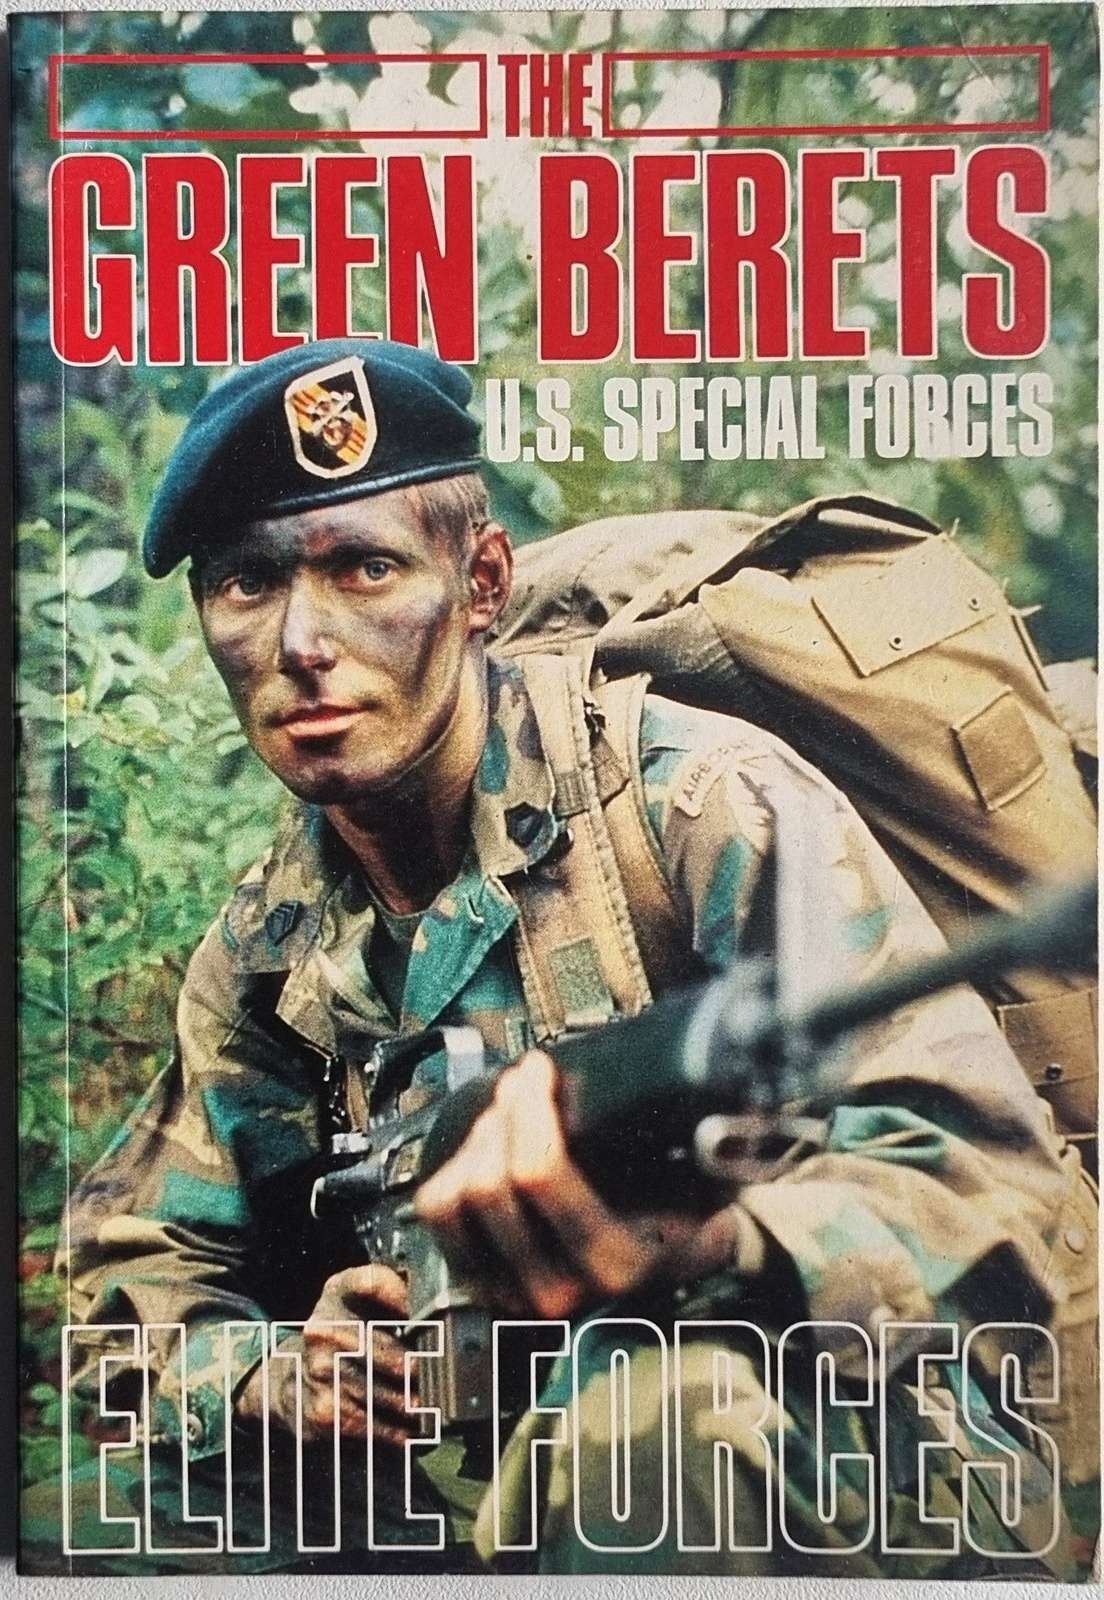 The Green Berets - U.S Special Features (Elite Forces)